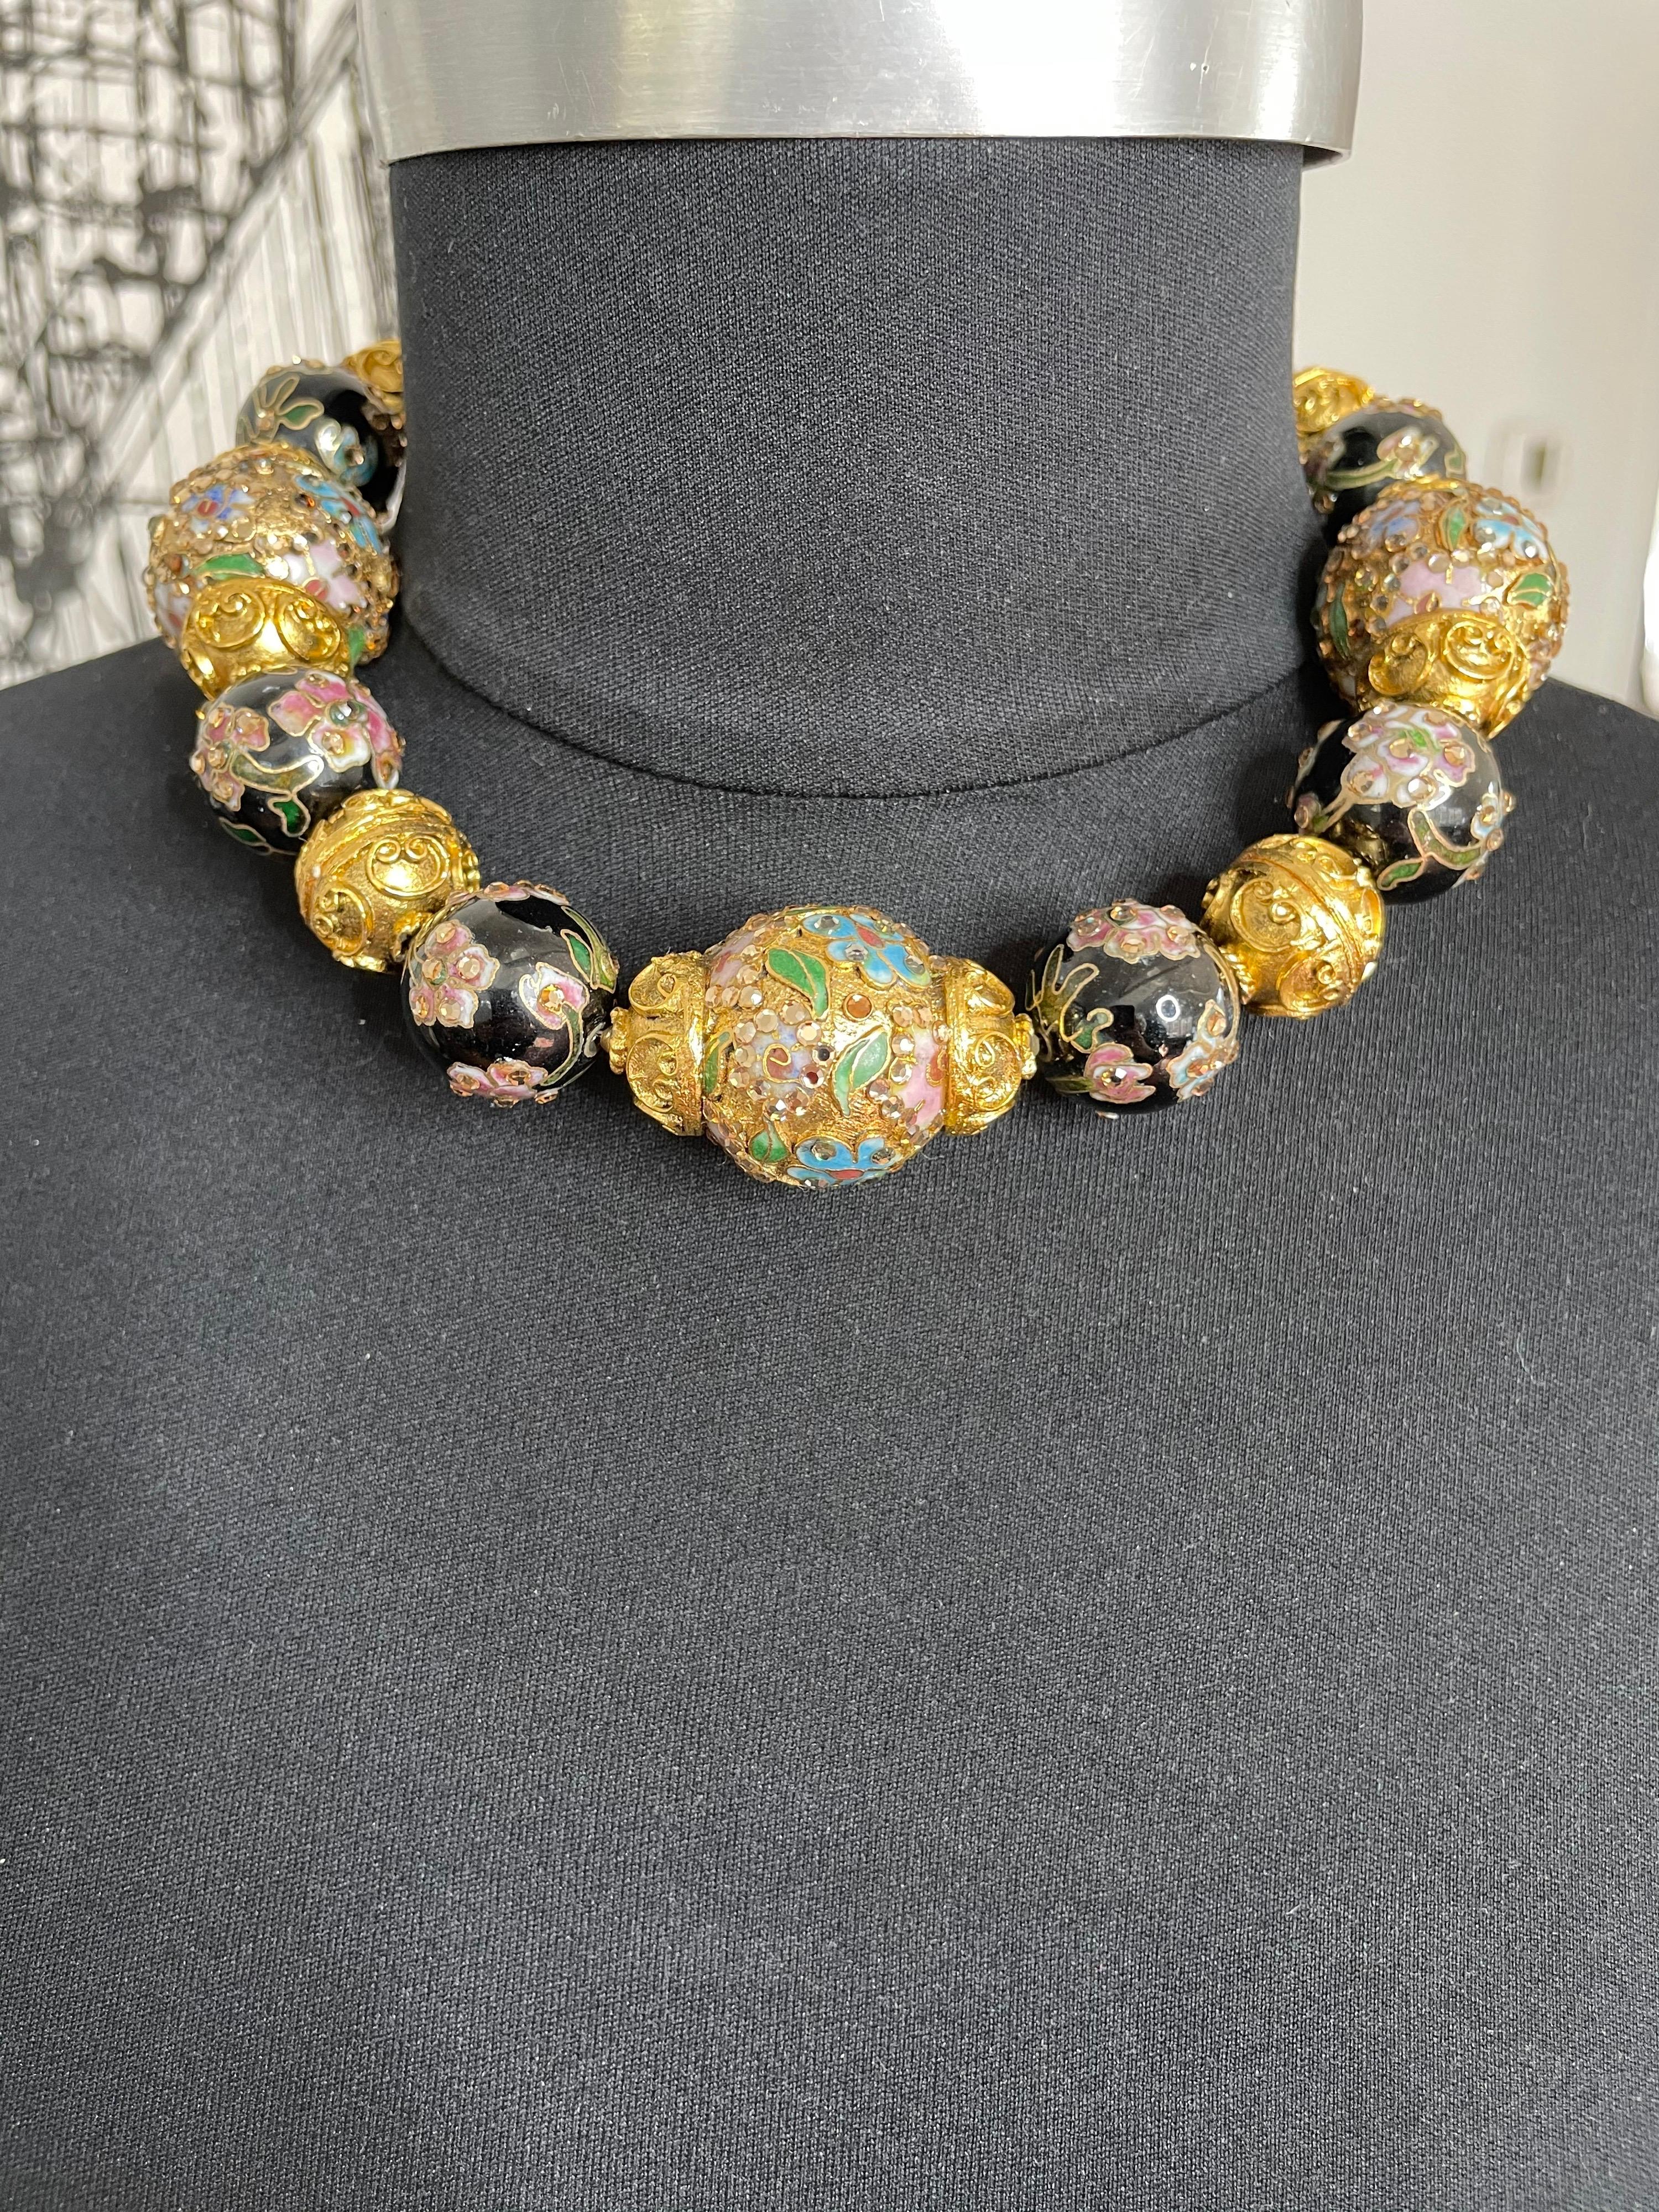  Barrera Couture Statement Gold Plated Ceramic Beaded Necklace 1980s Never worn For Sale 2